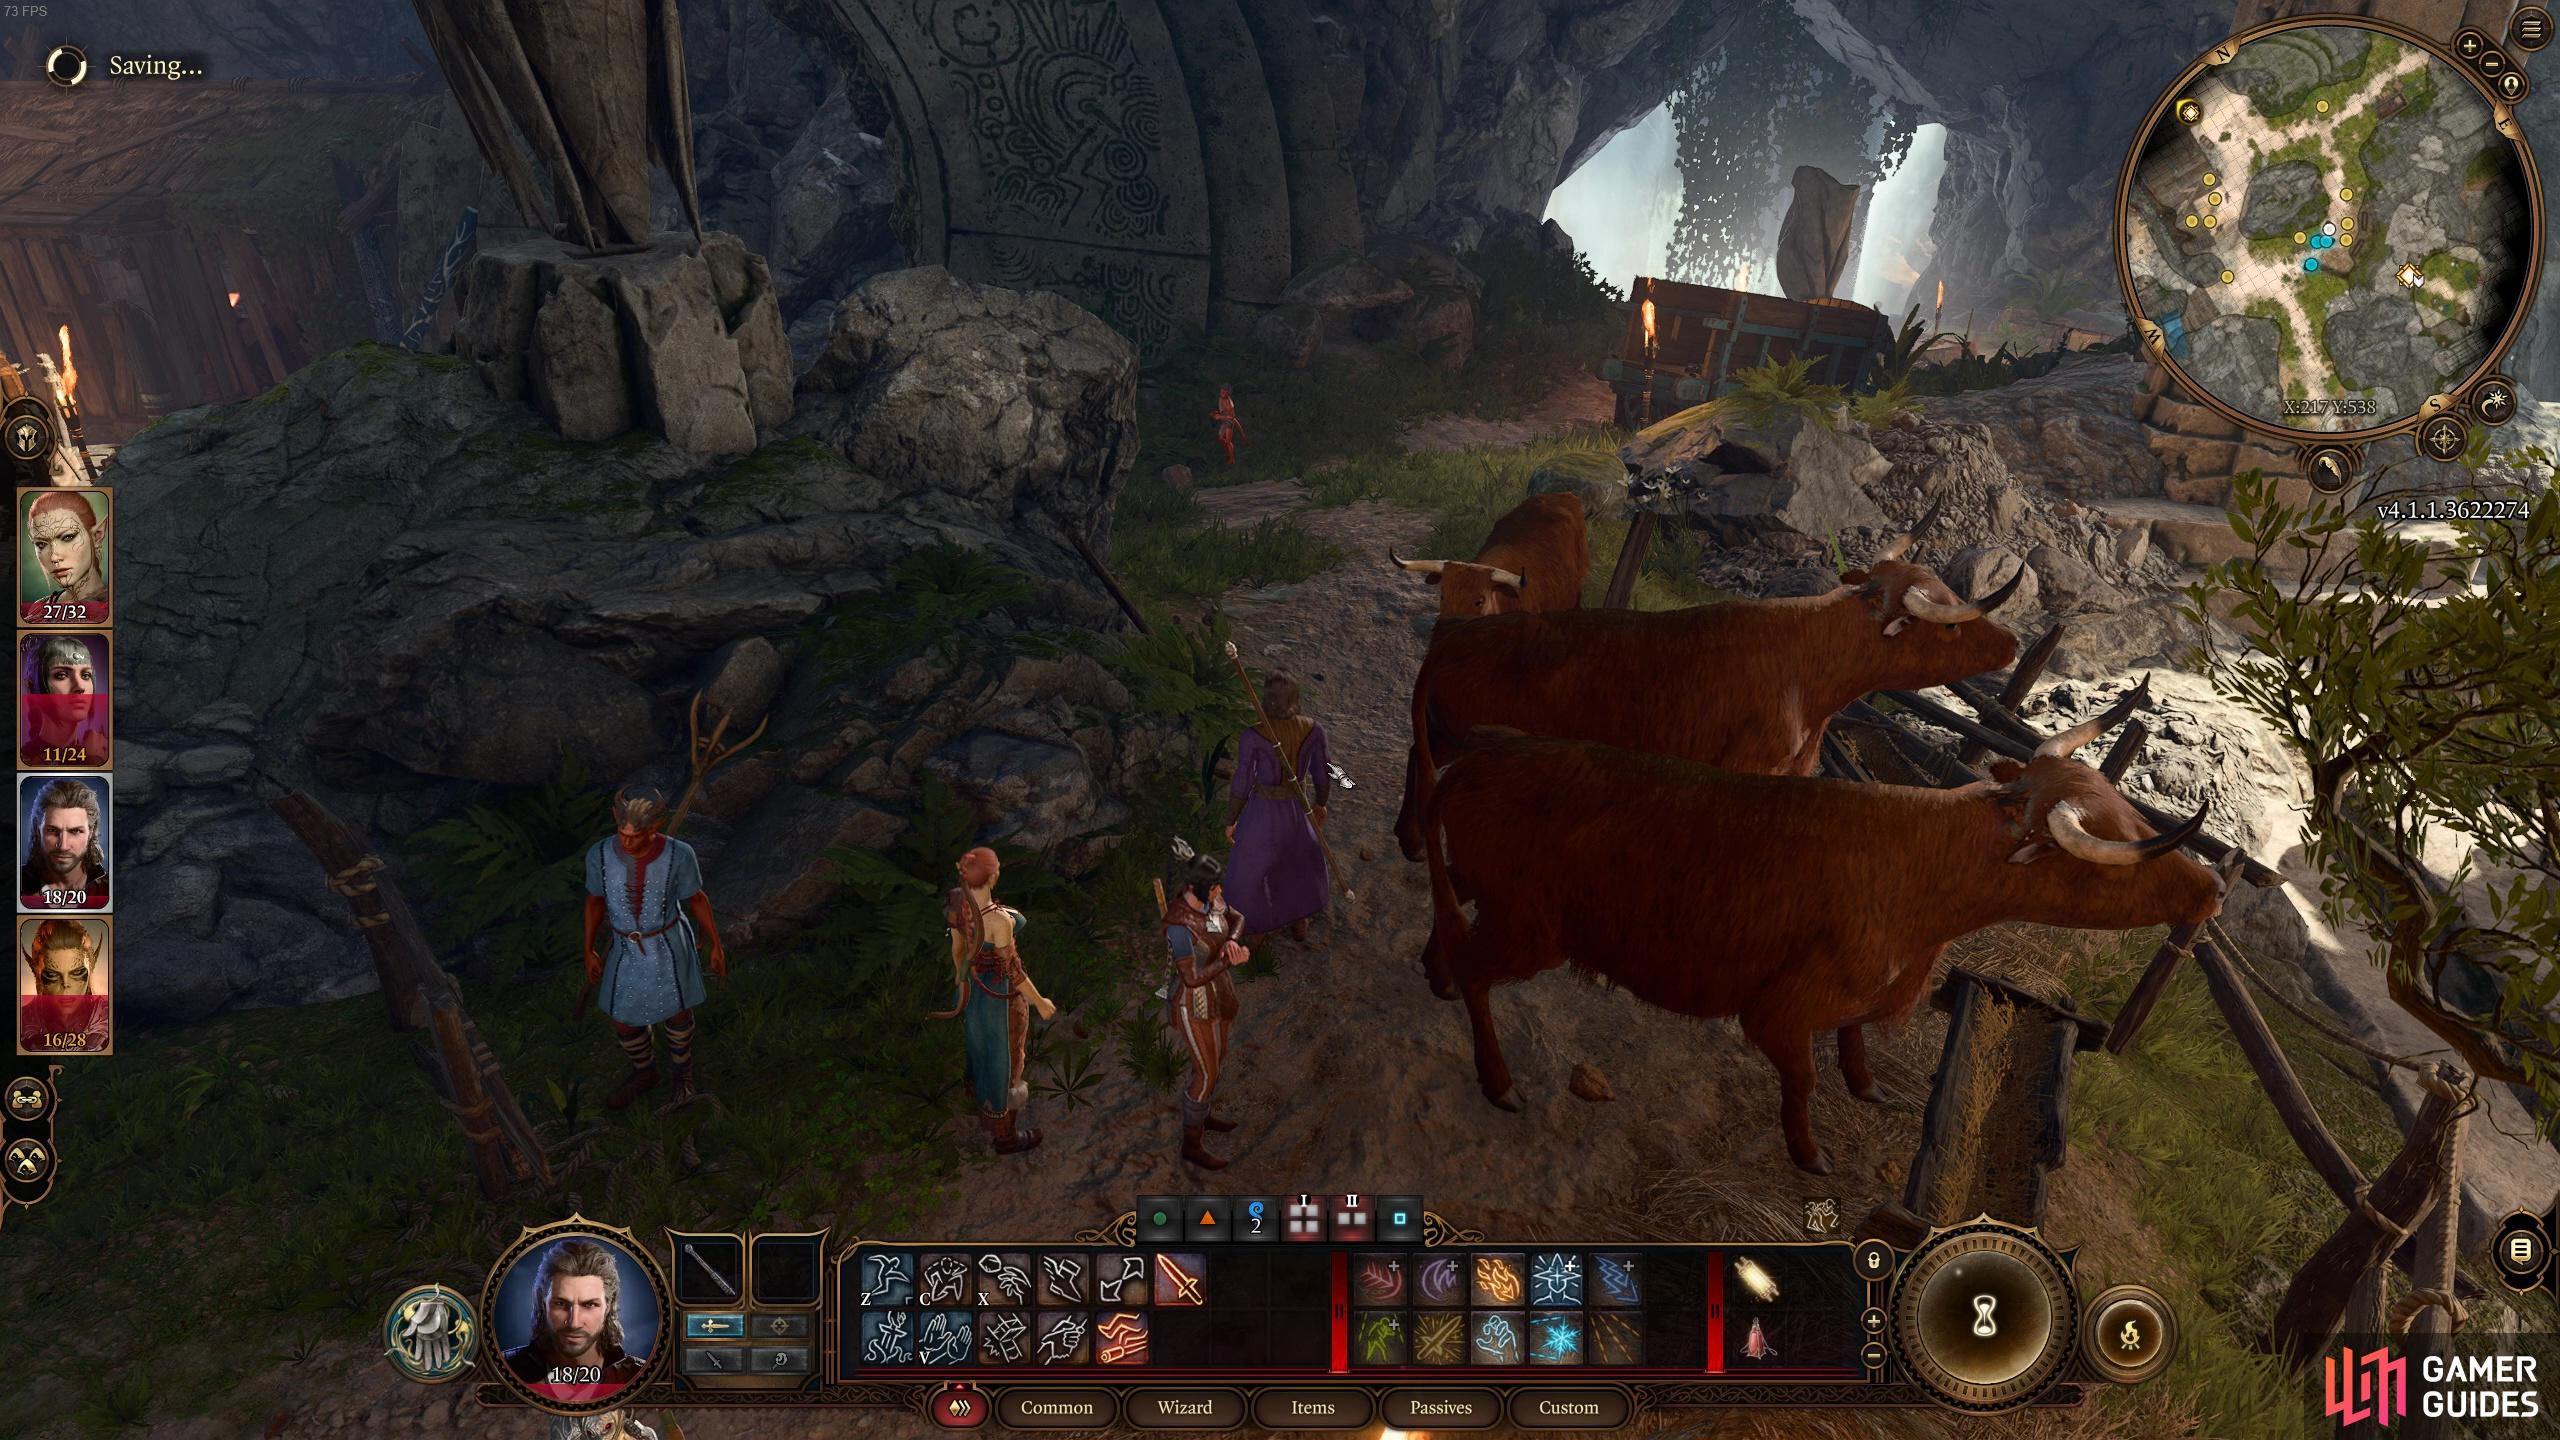 The Strange Ox can be found in The Hollow in Druid Grove.